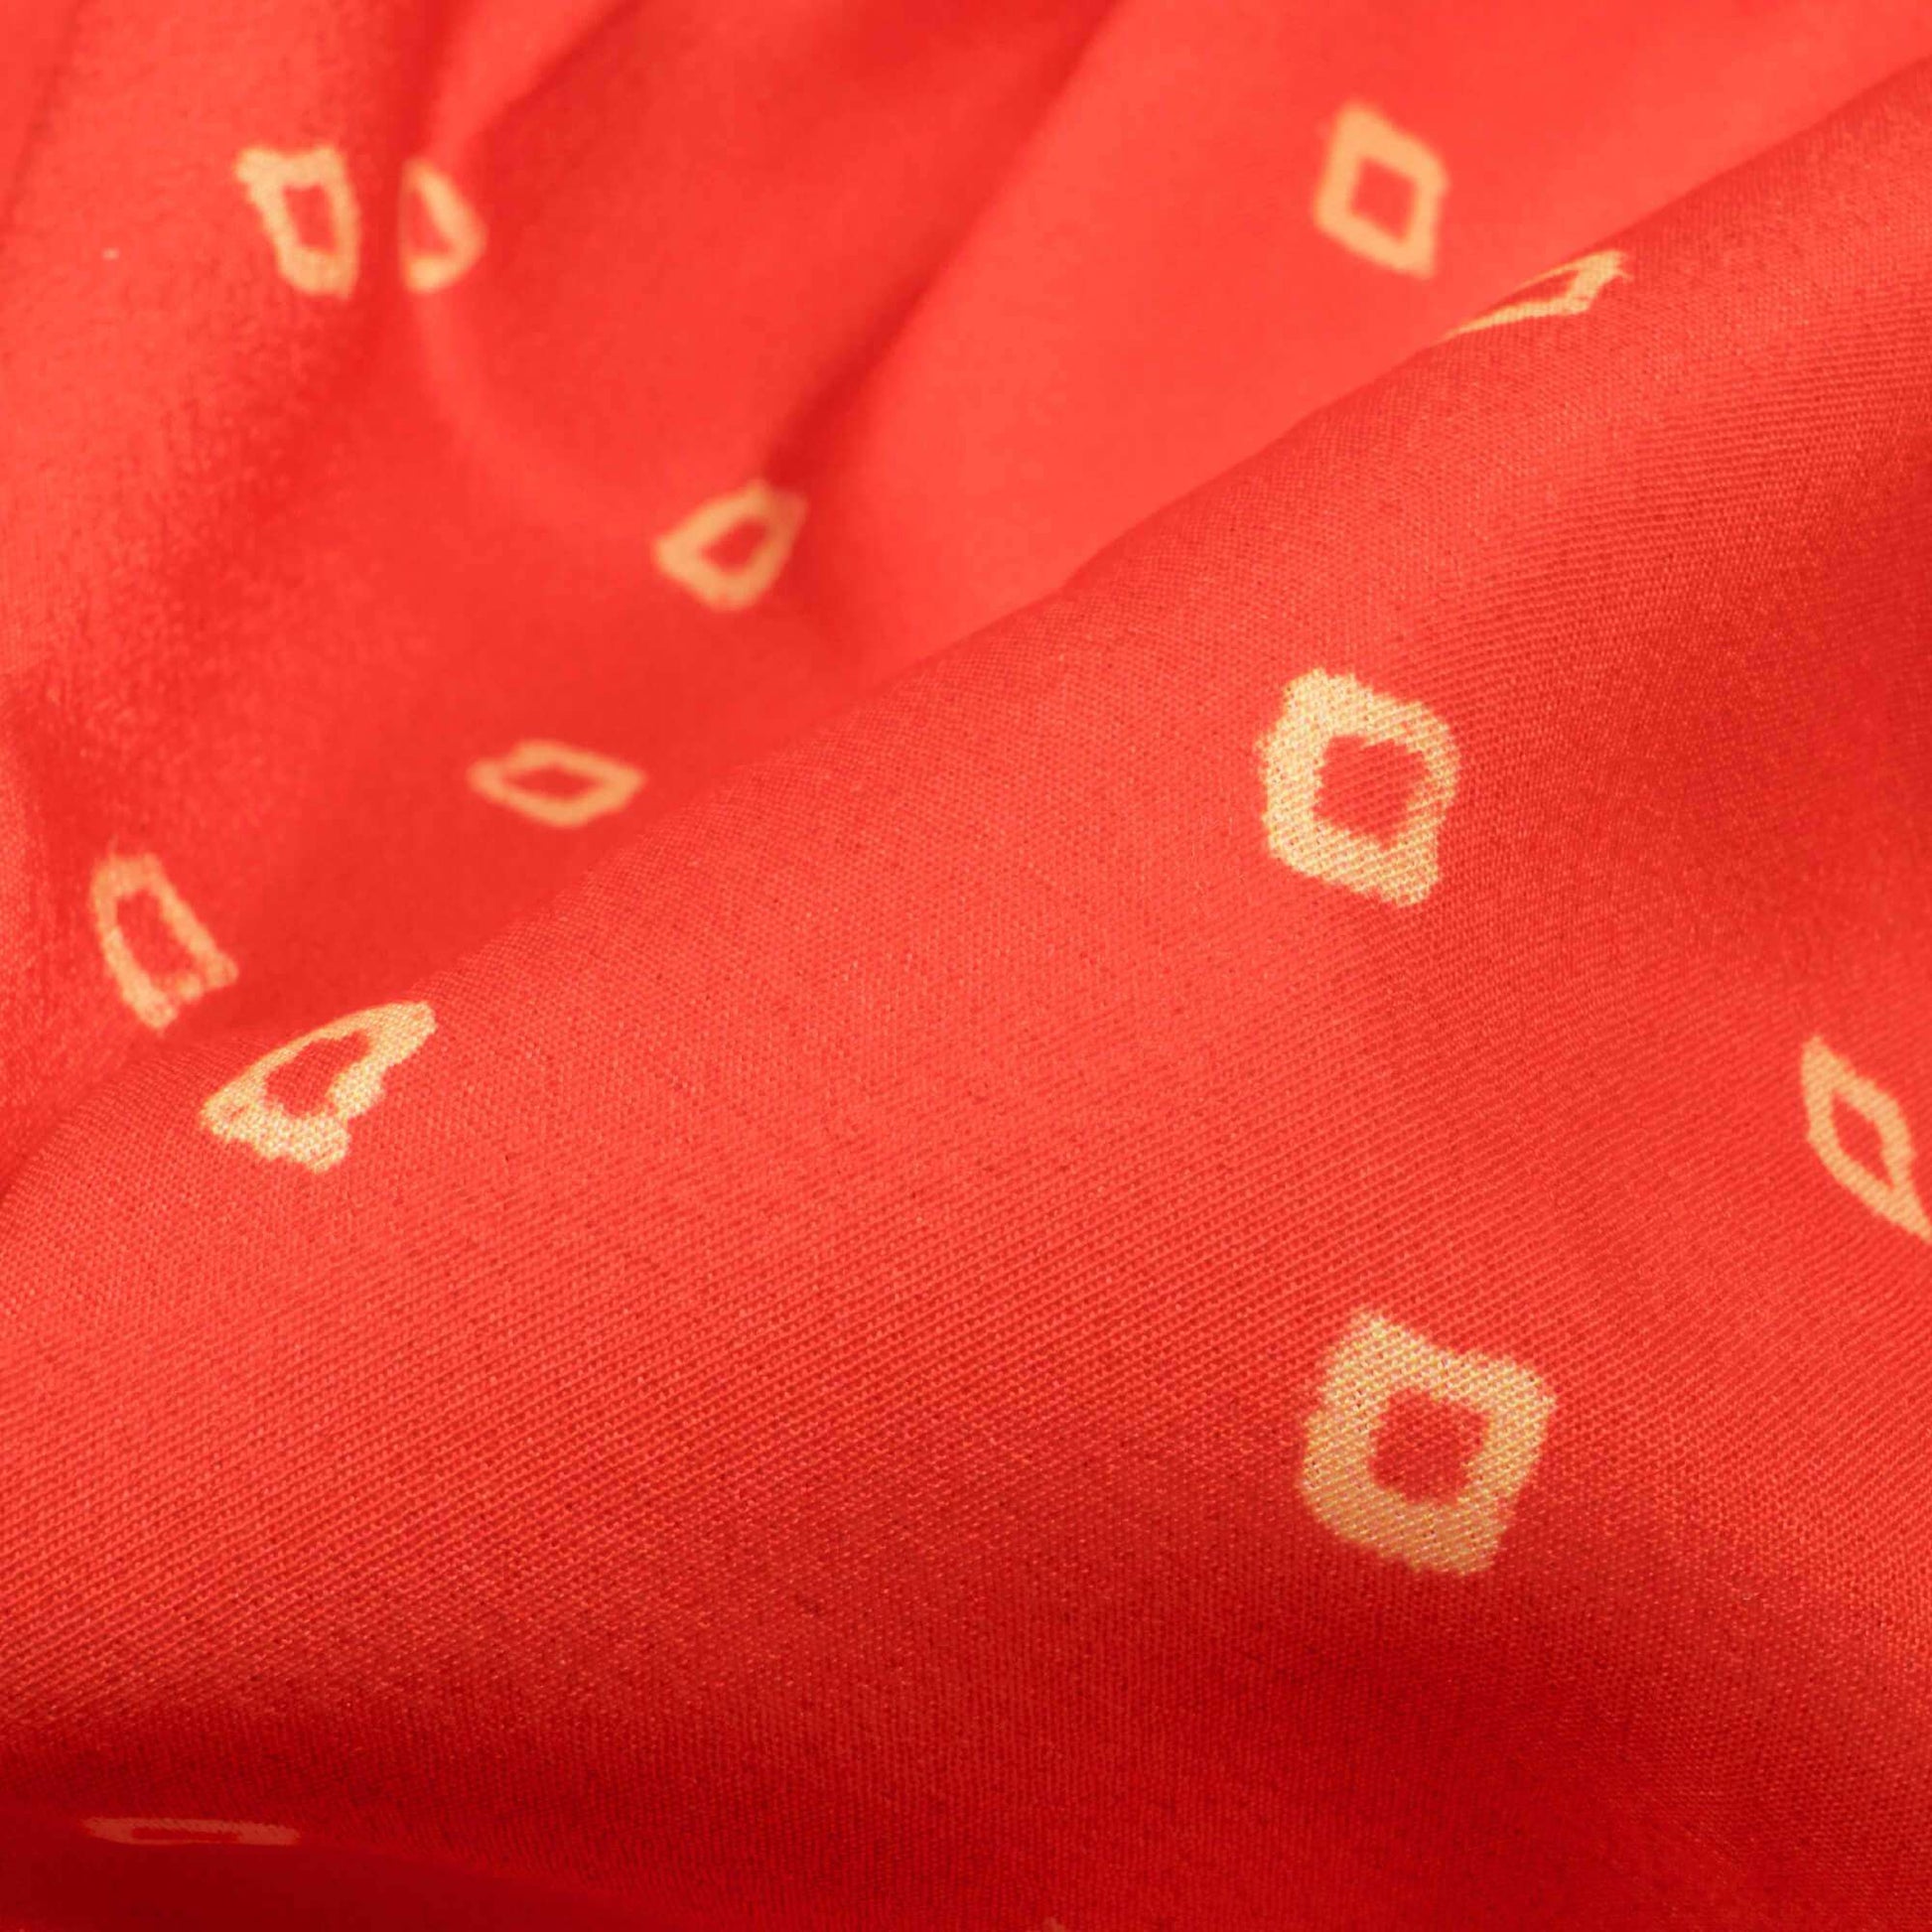 Fire Orange And Cream Bandhani Pattern Digital Print French Crepe Fabric - Fabcurate